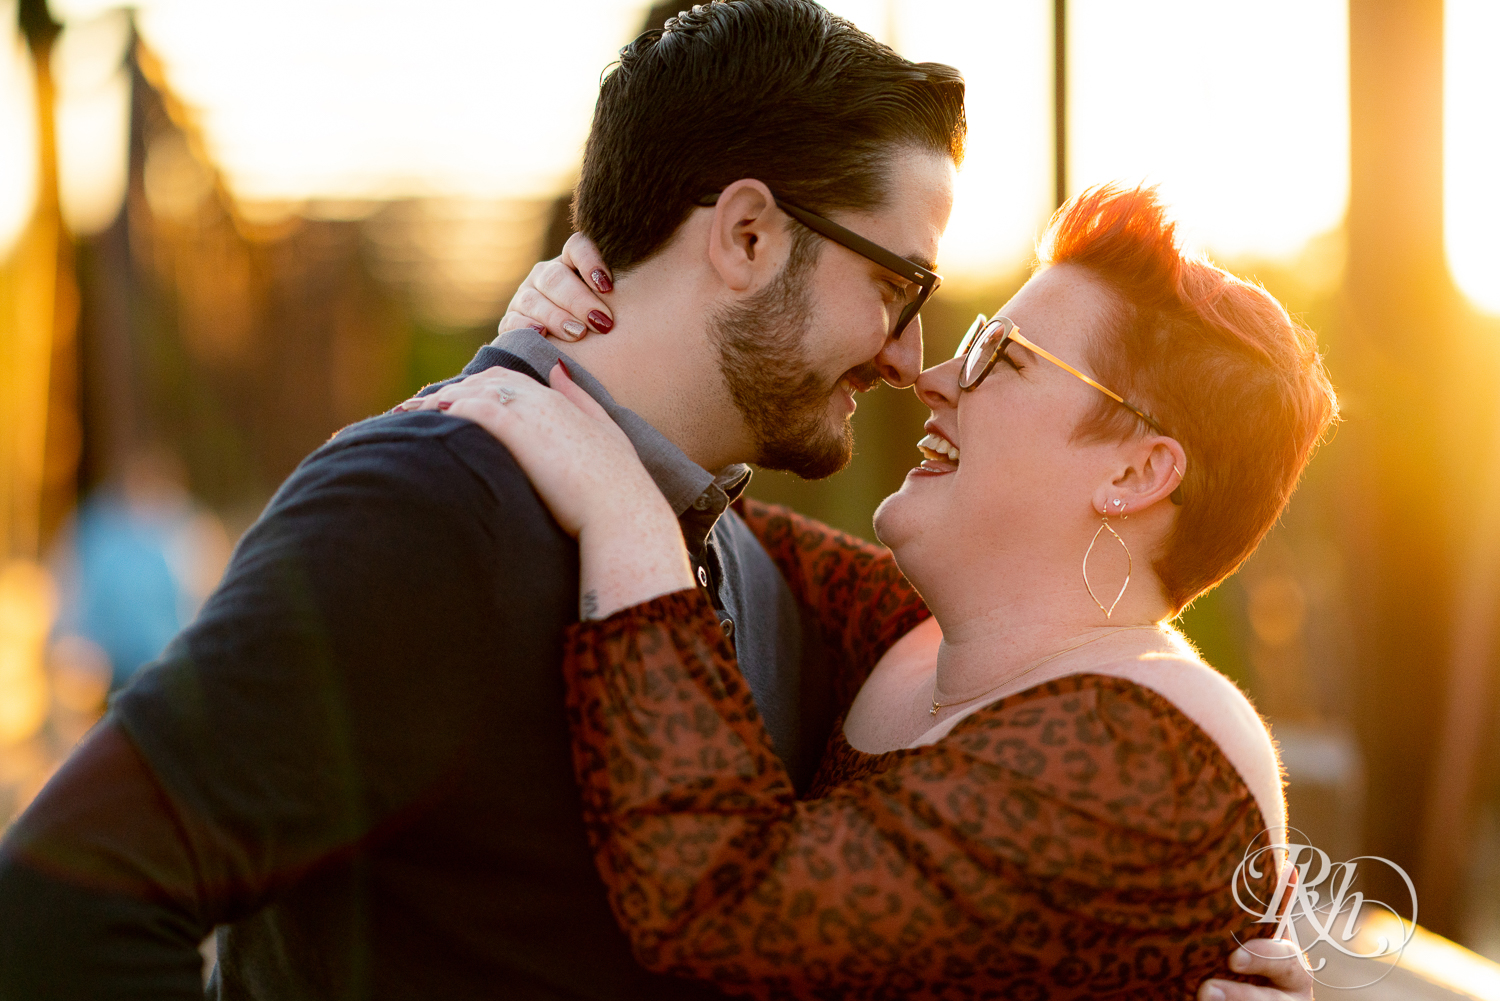 Man and woman in glasses laughing at sunset.